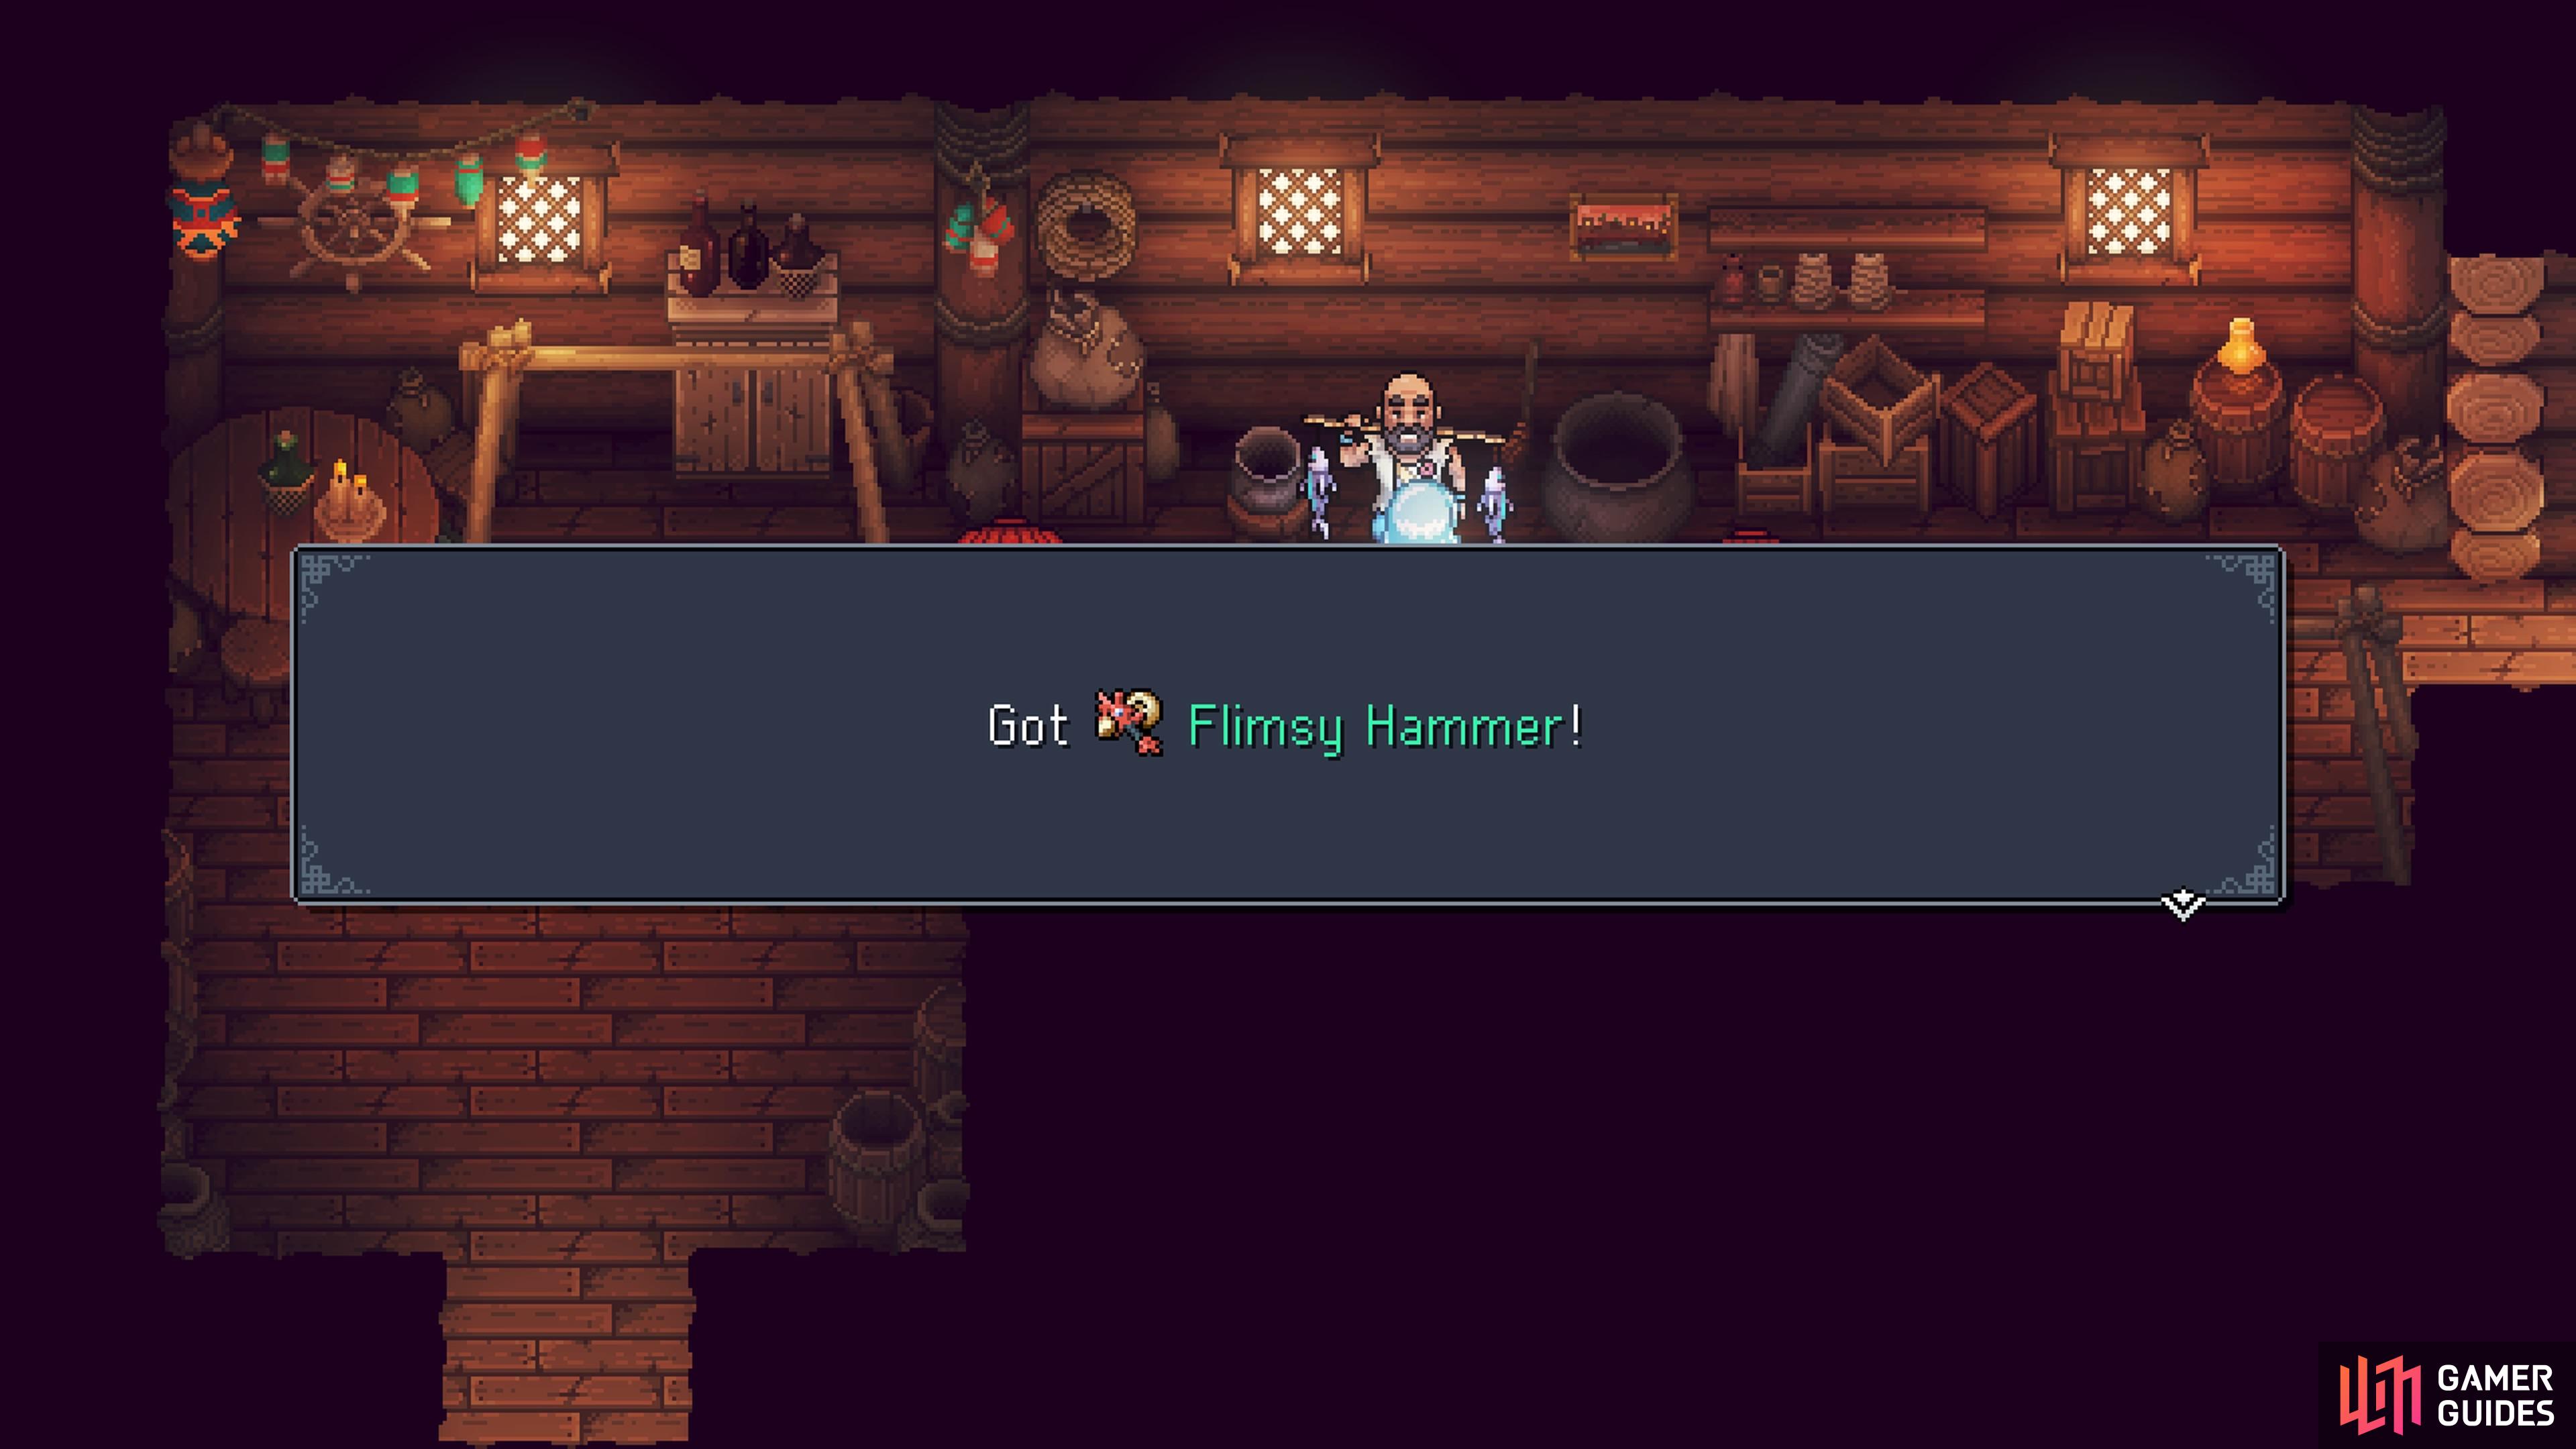 There are four Flimsy Hammers to find in the game.